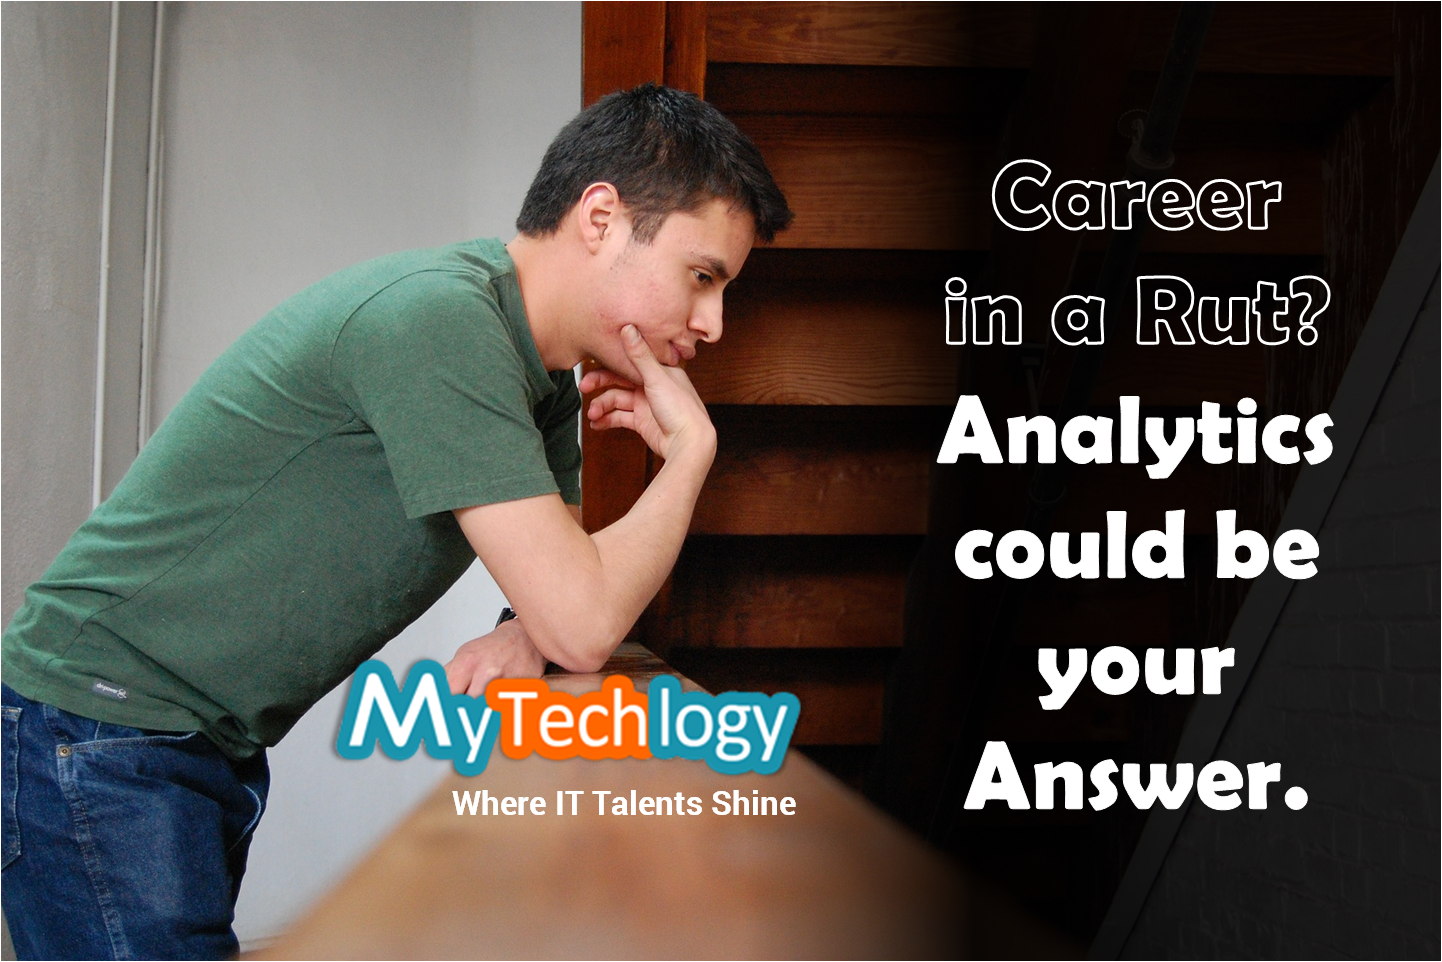 Career in a Rut? Analytics could be your Answer - Image 1